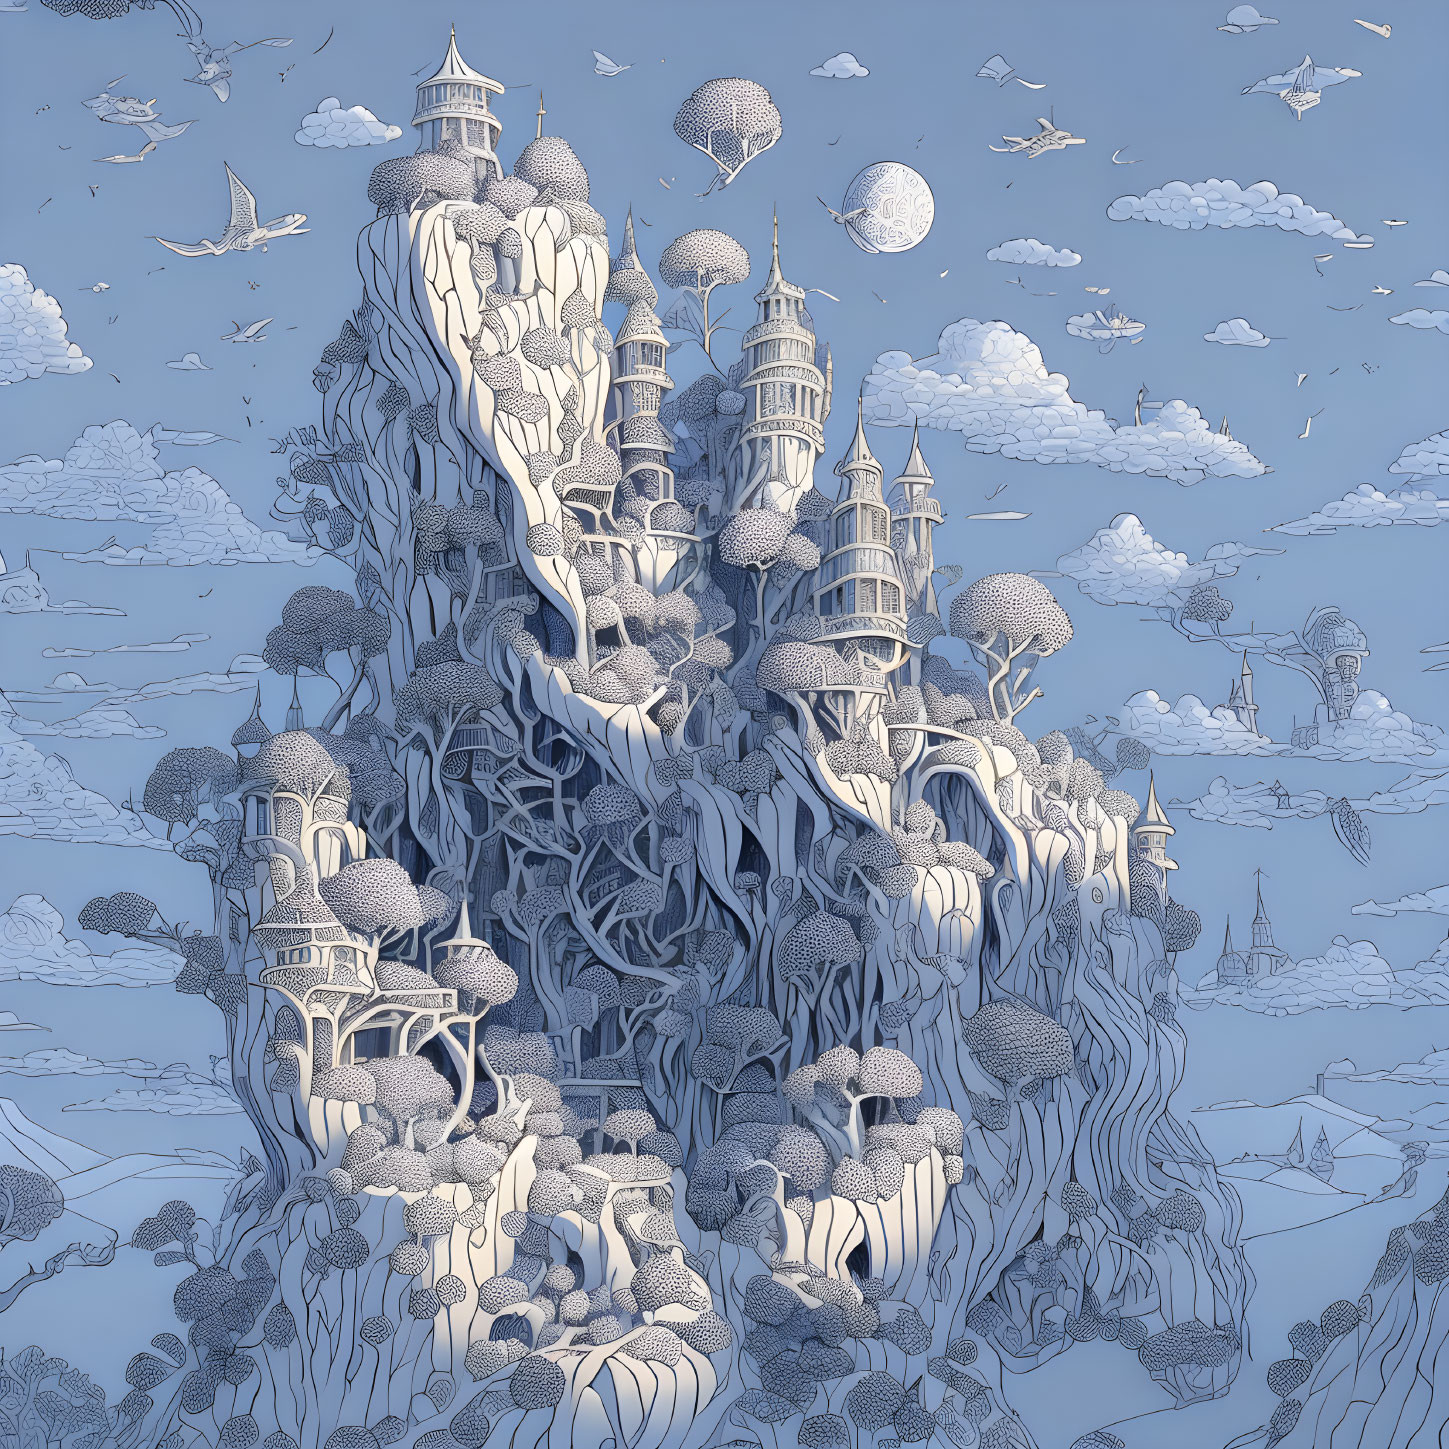 Fantasy castle on rock formation with hot air balloons and fantastical structures